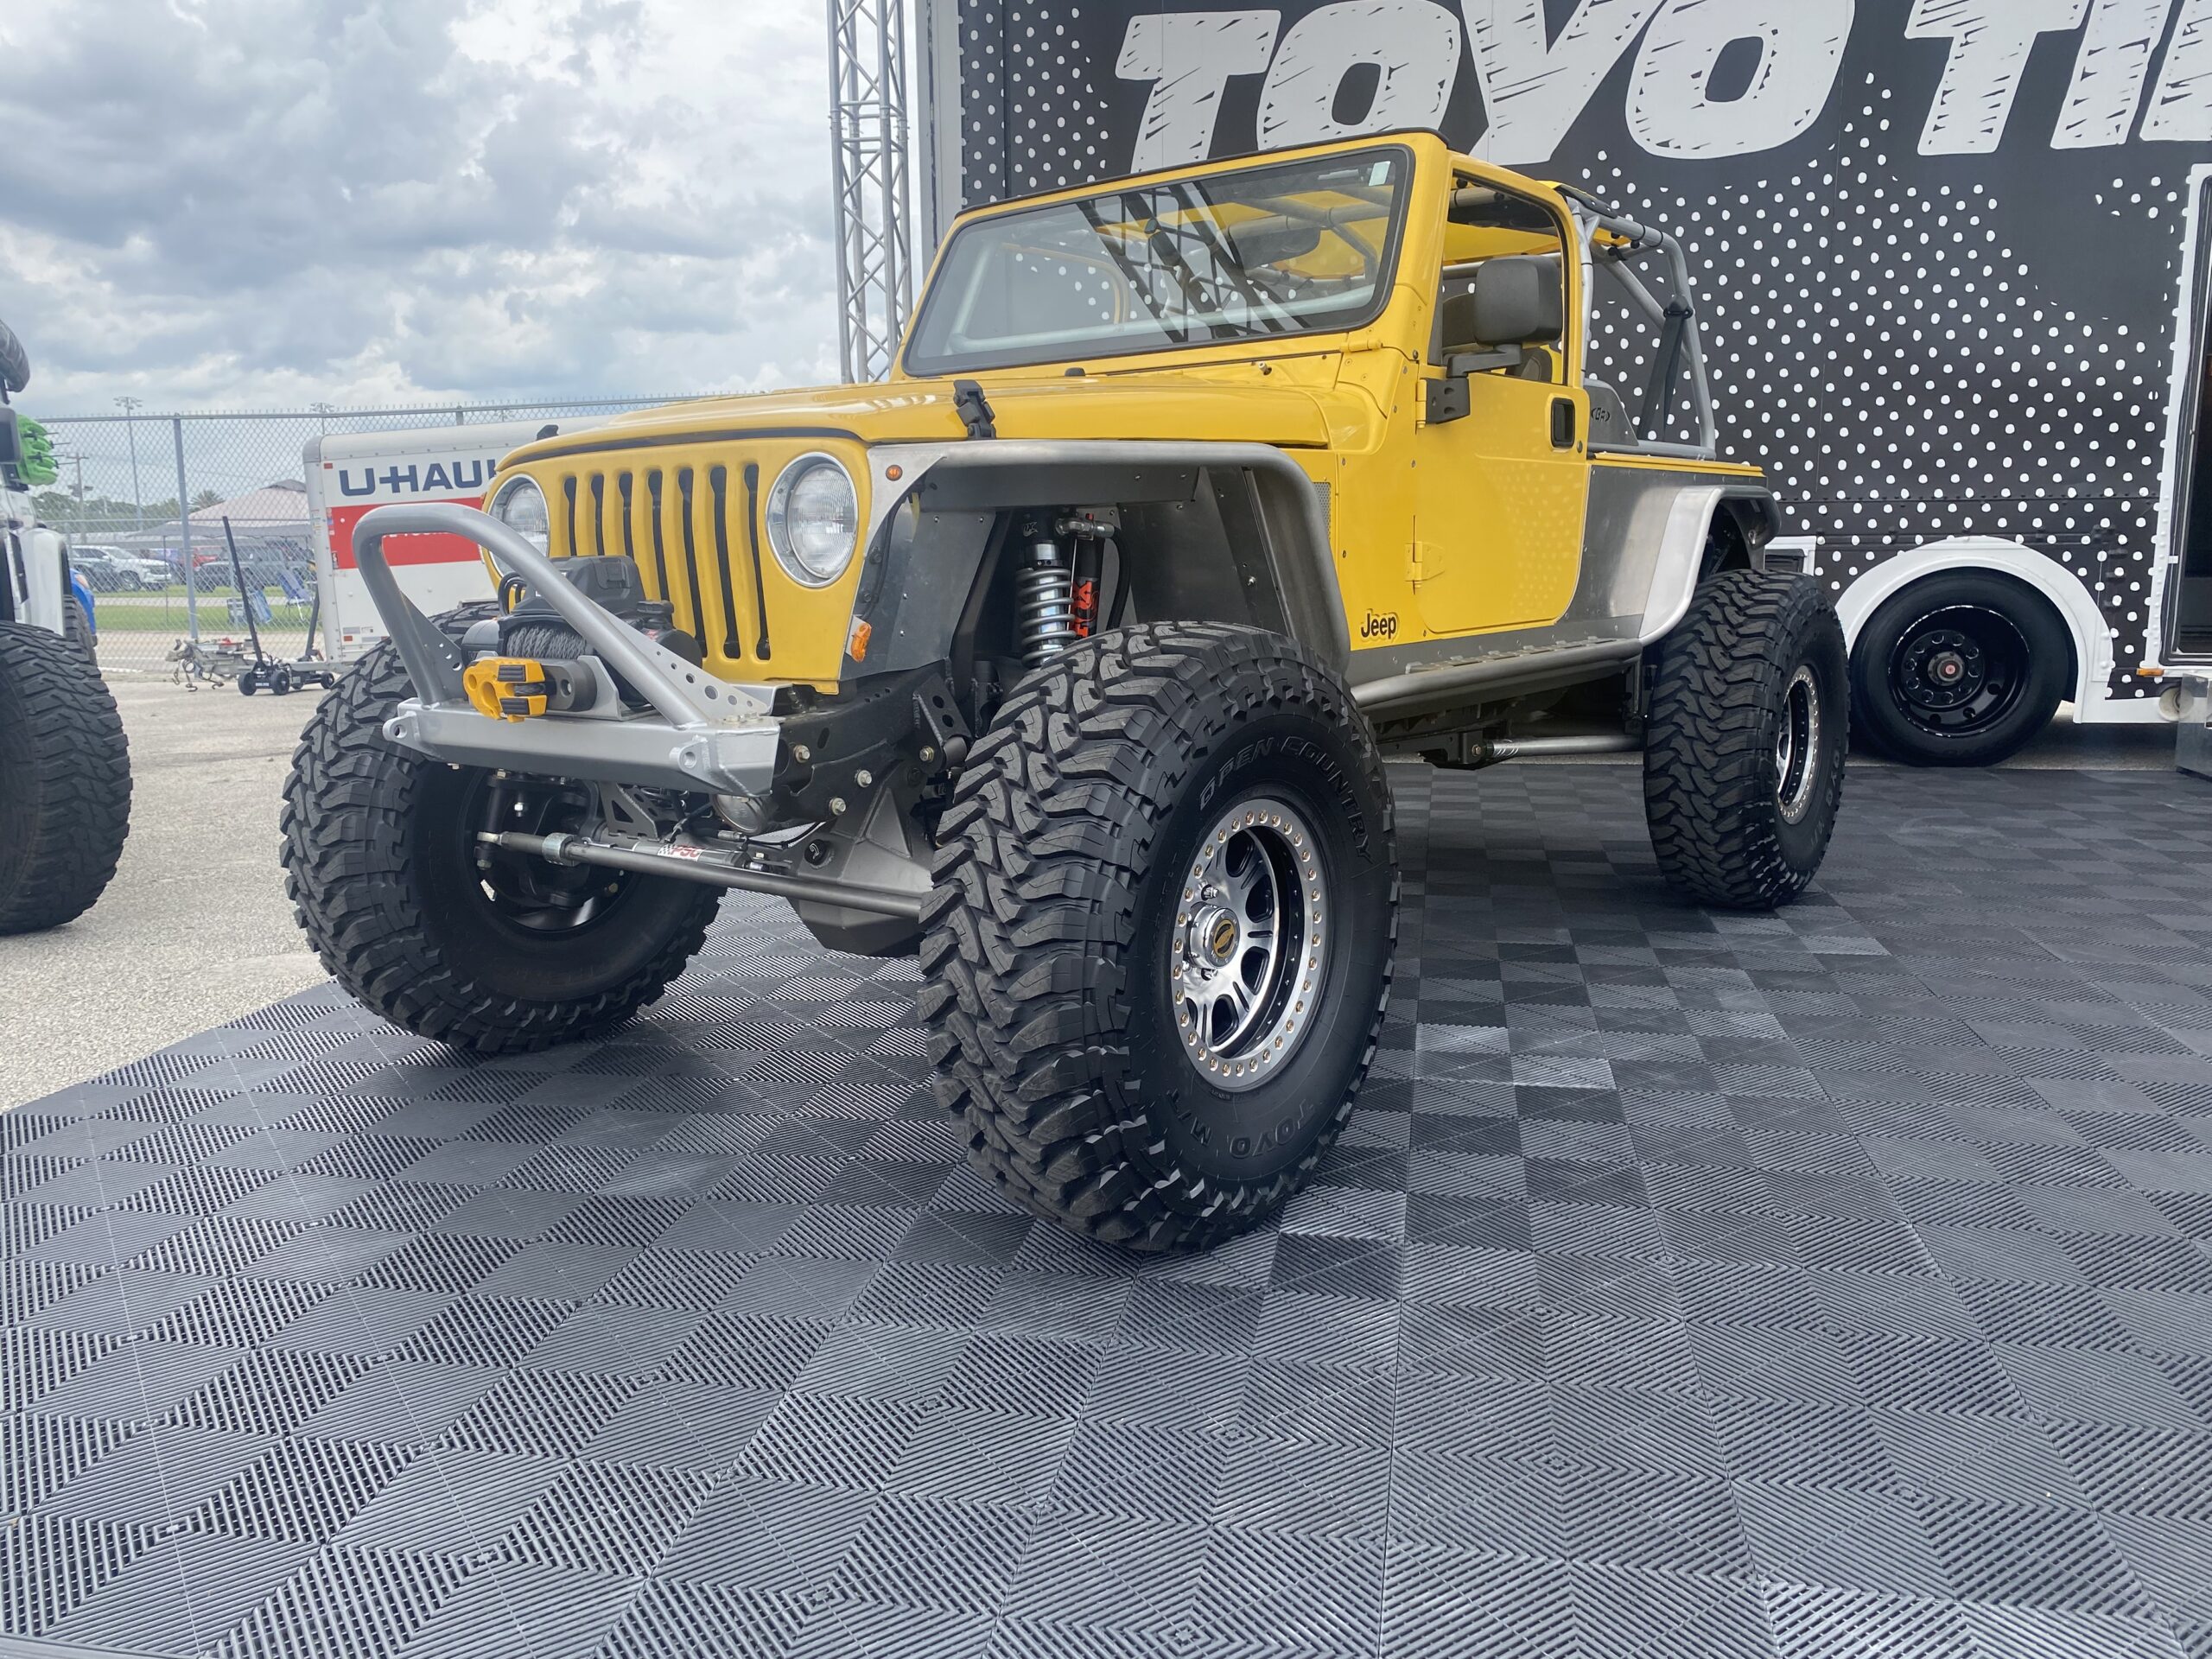 Yellow two door Jeep parked in Toyo Tires booth.